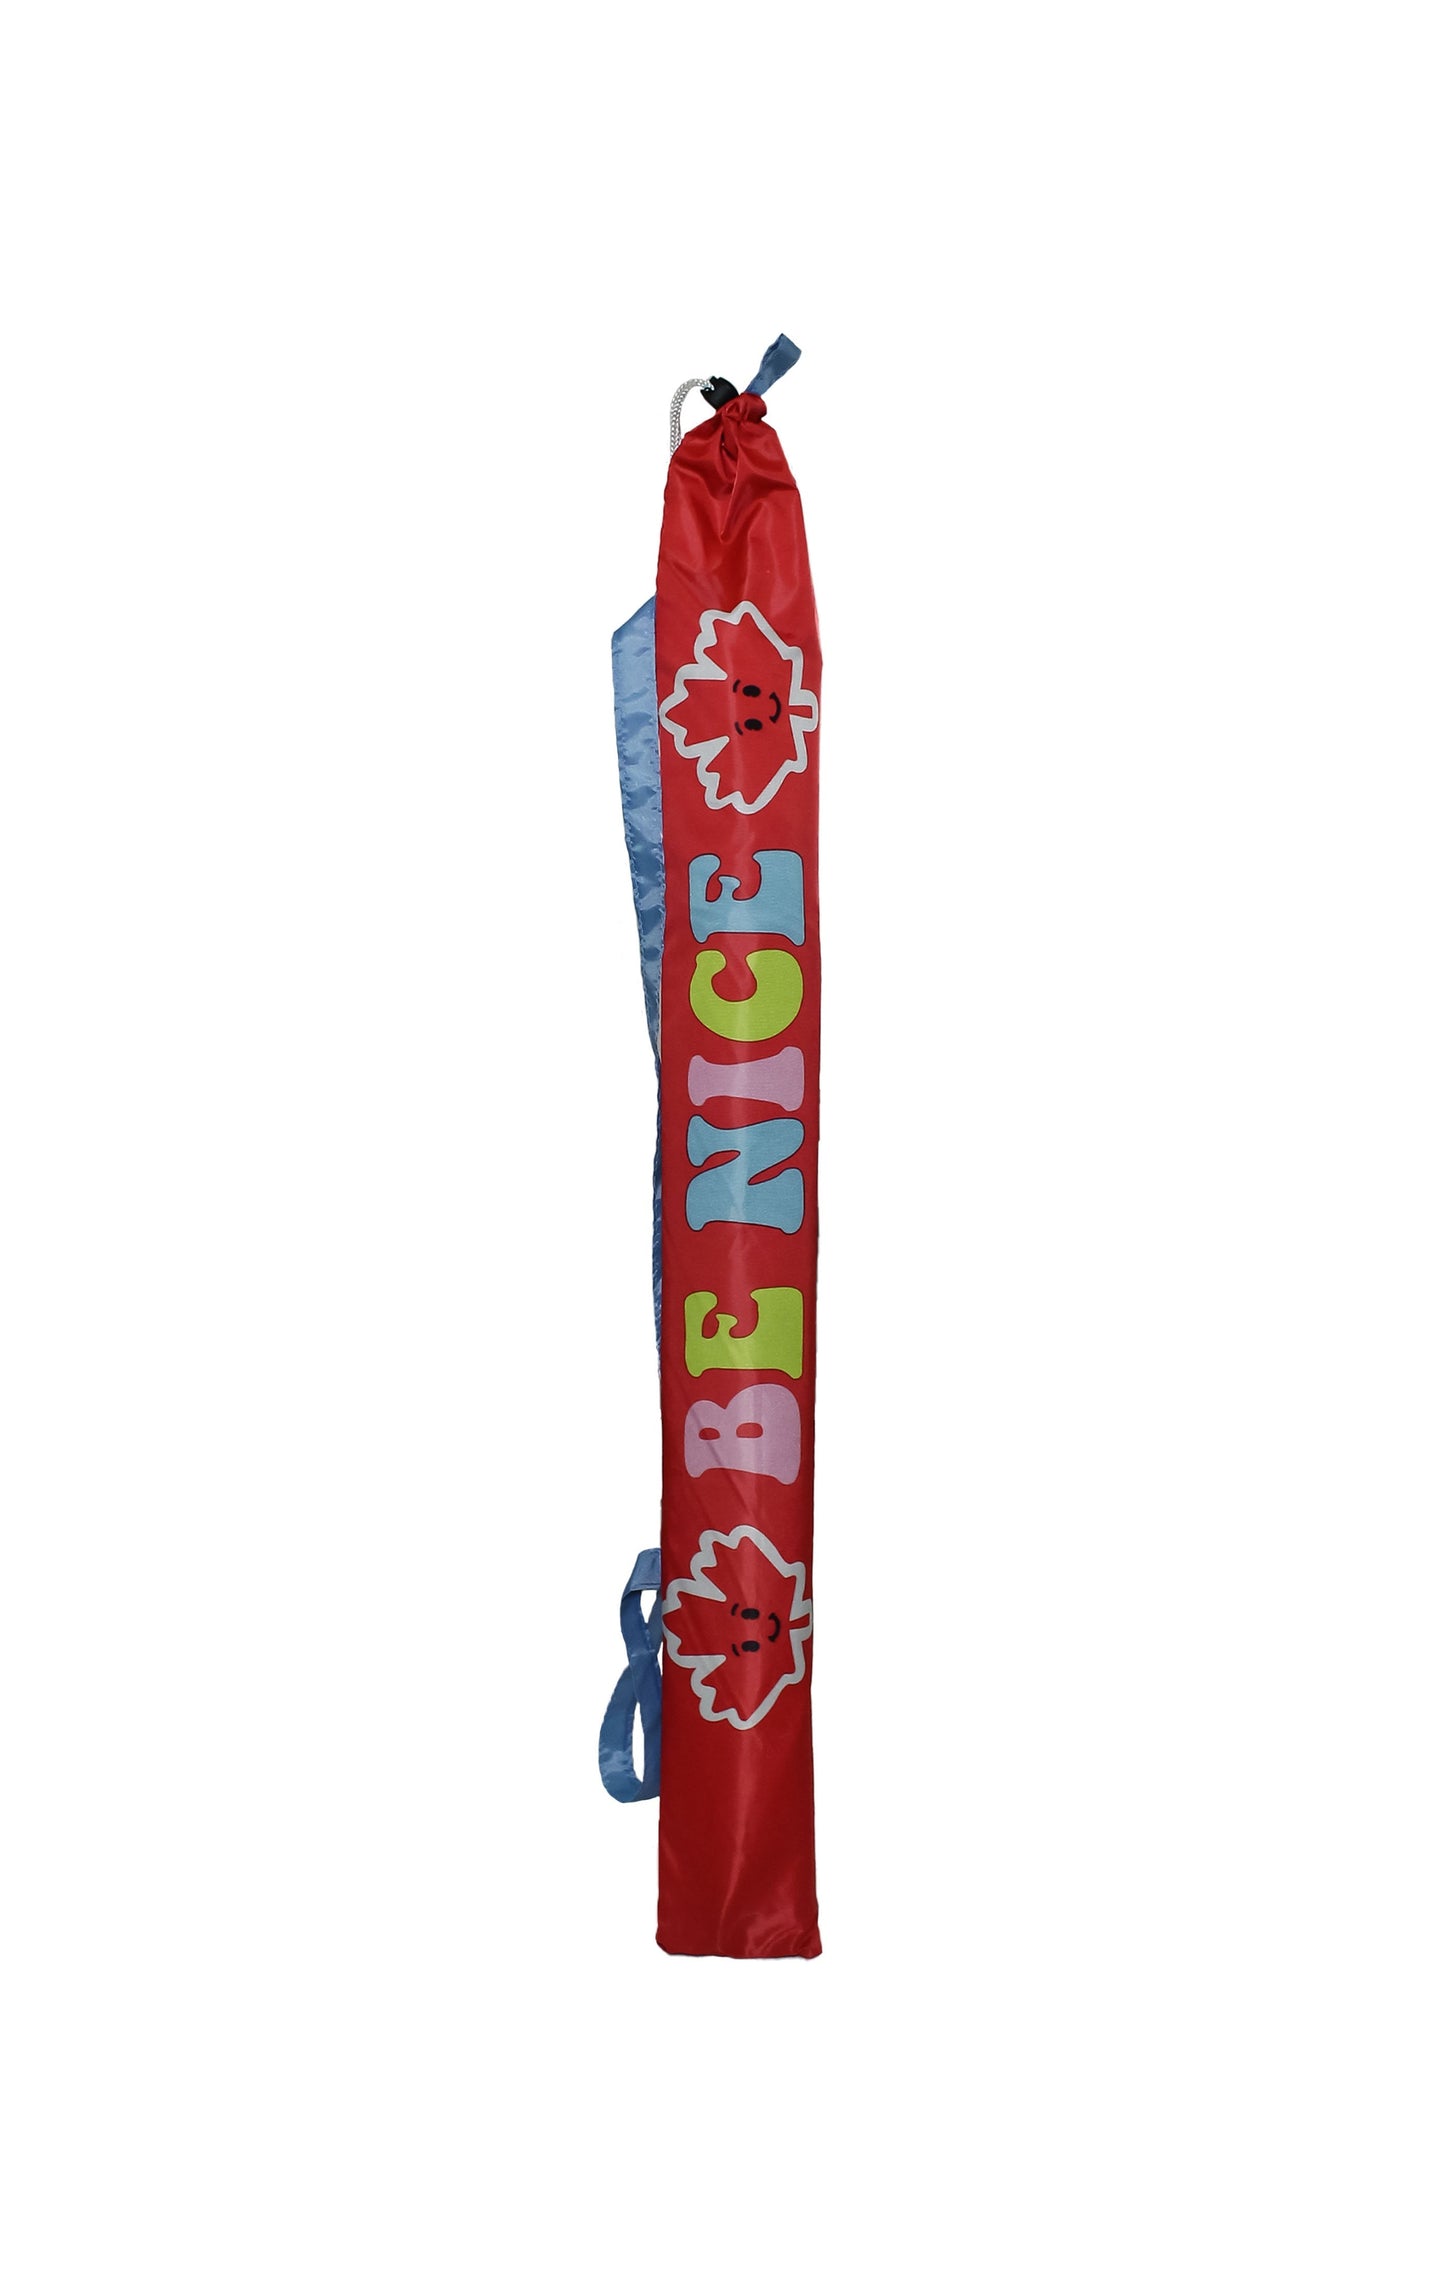 Canada Day Kids Beach Umbrella With Traveling Case